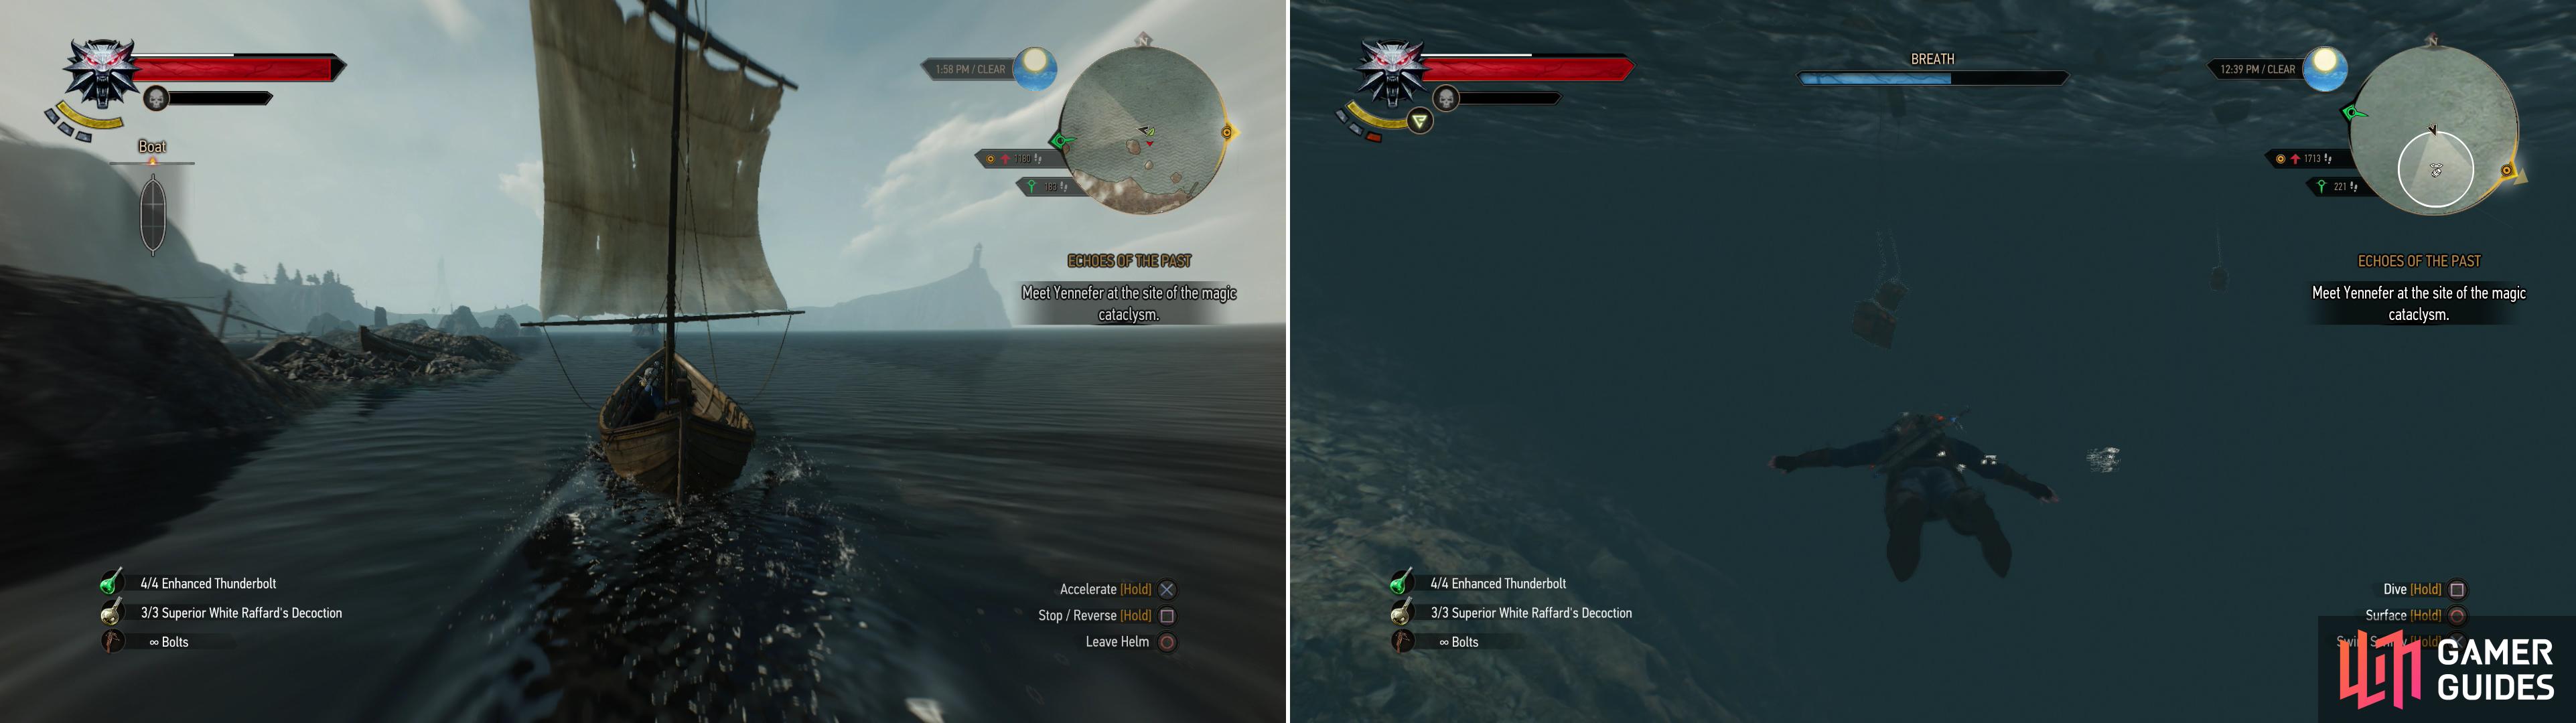 A good bit of exploration in Skellige will by done by boat, instead of on foot (left). Be sure to seek out Smuggler's Caches as you go to score sweet loot (right).